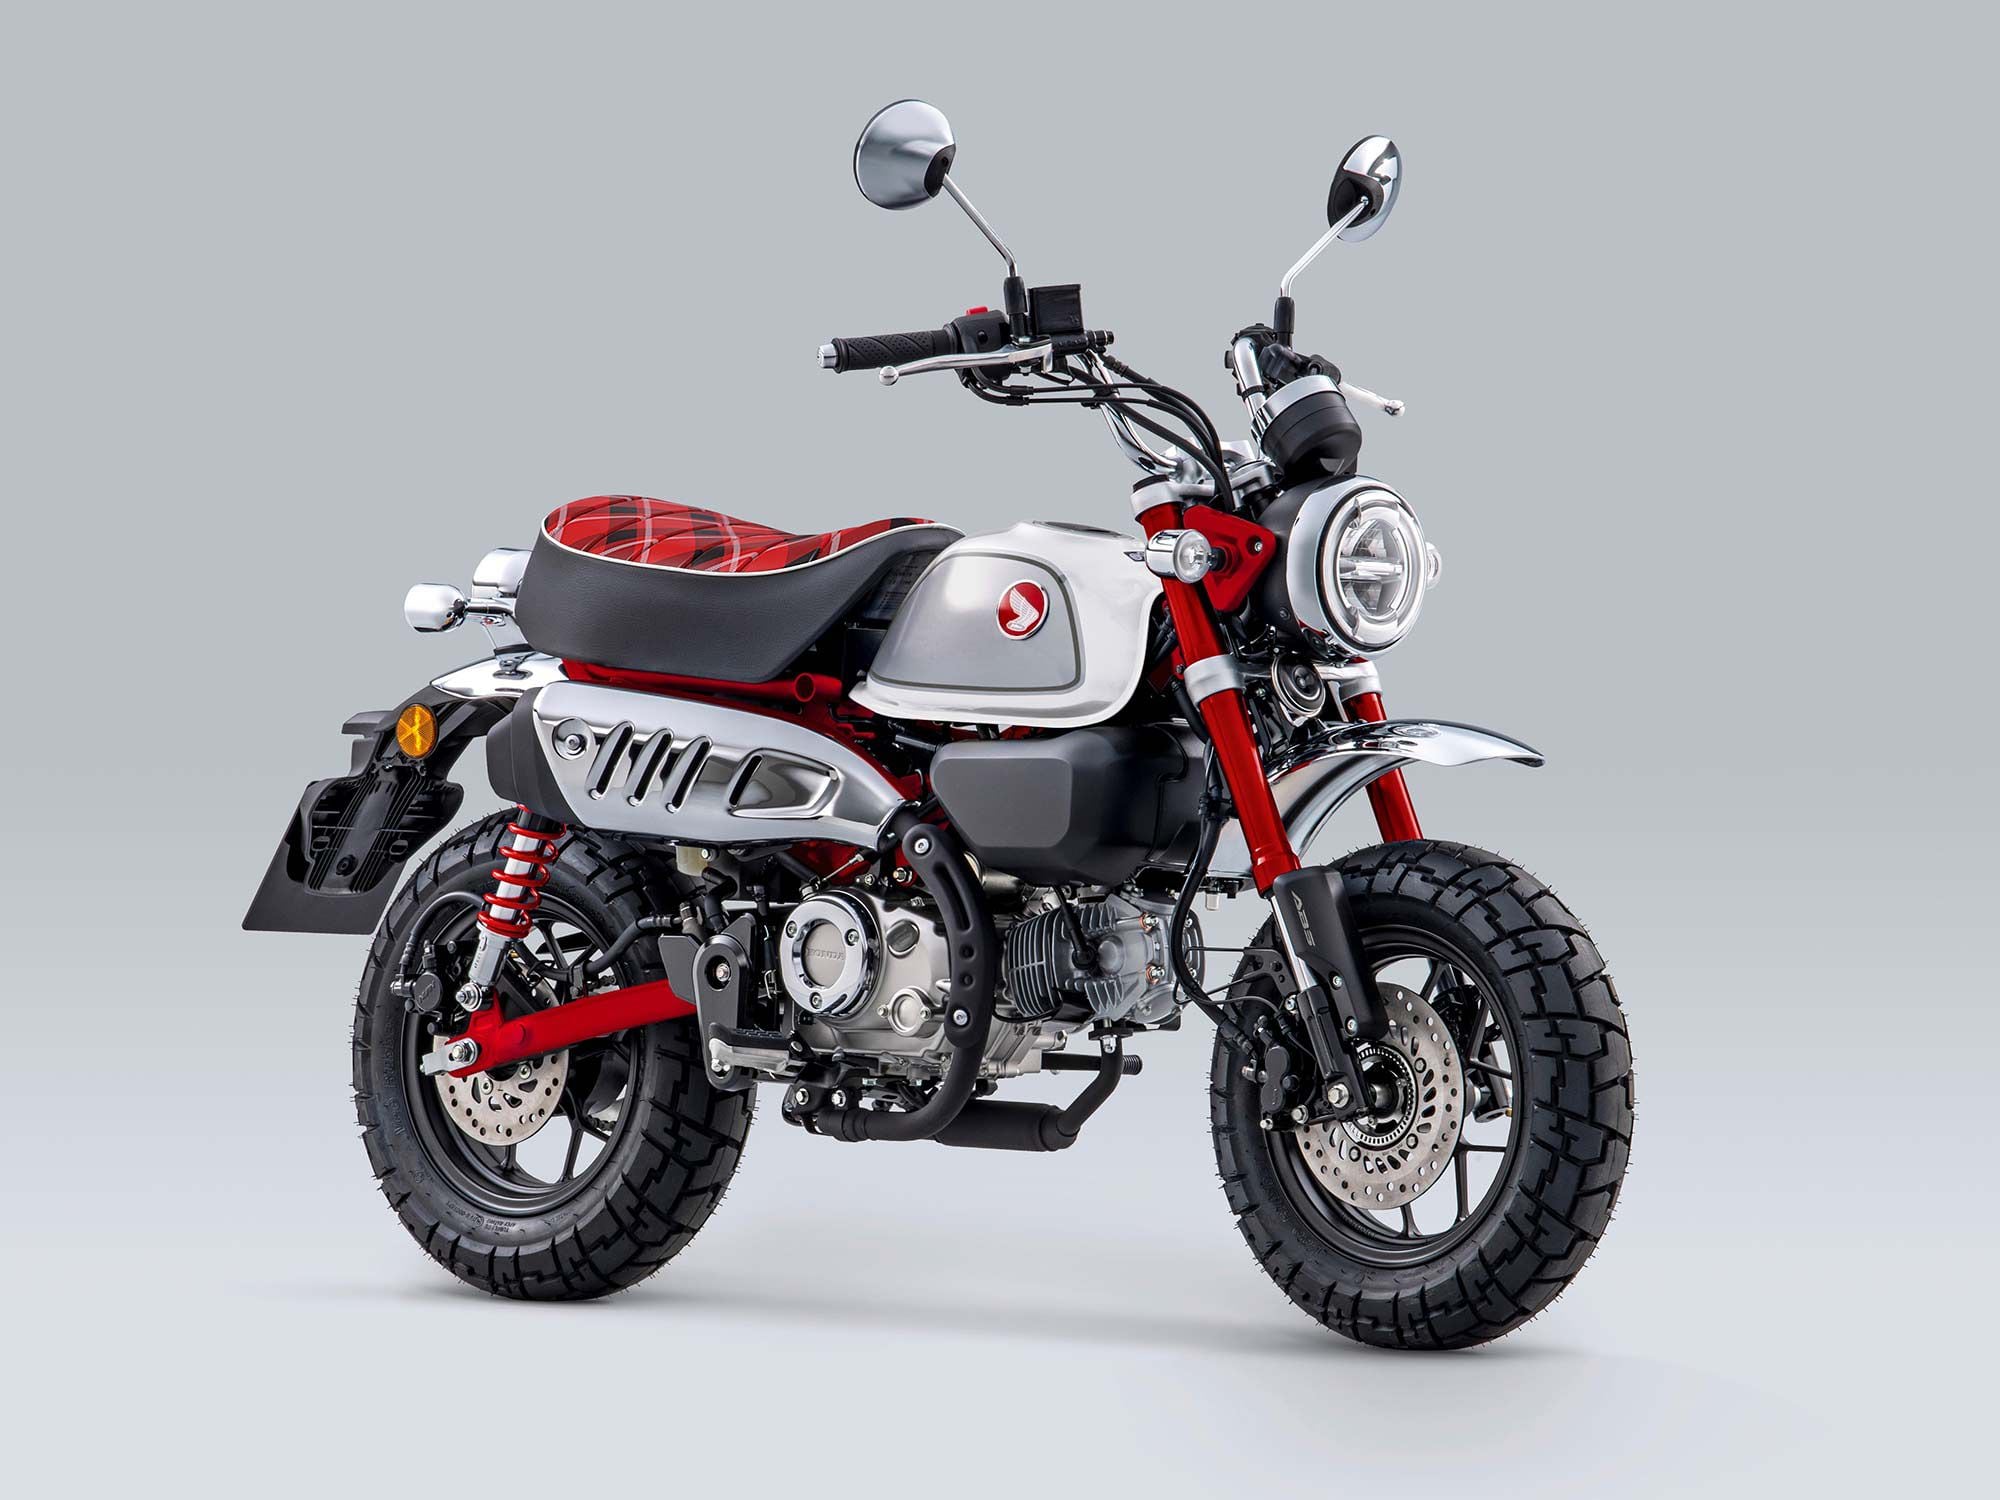 The Monkey’s classic Pearl Nebula Red option returns for 2023 too, this time on the color-matched frame and suspension bits. That seat, though, is next level.